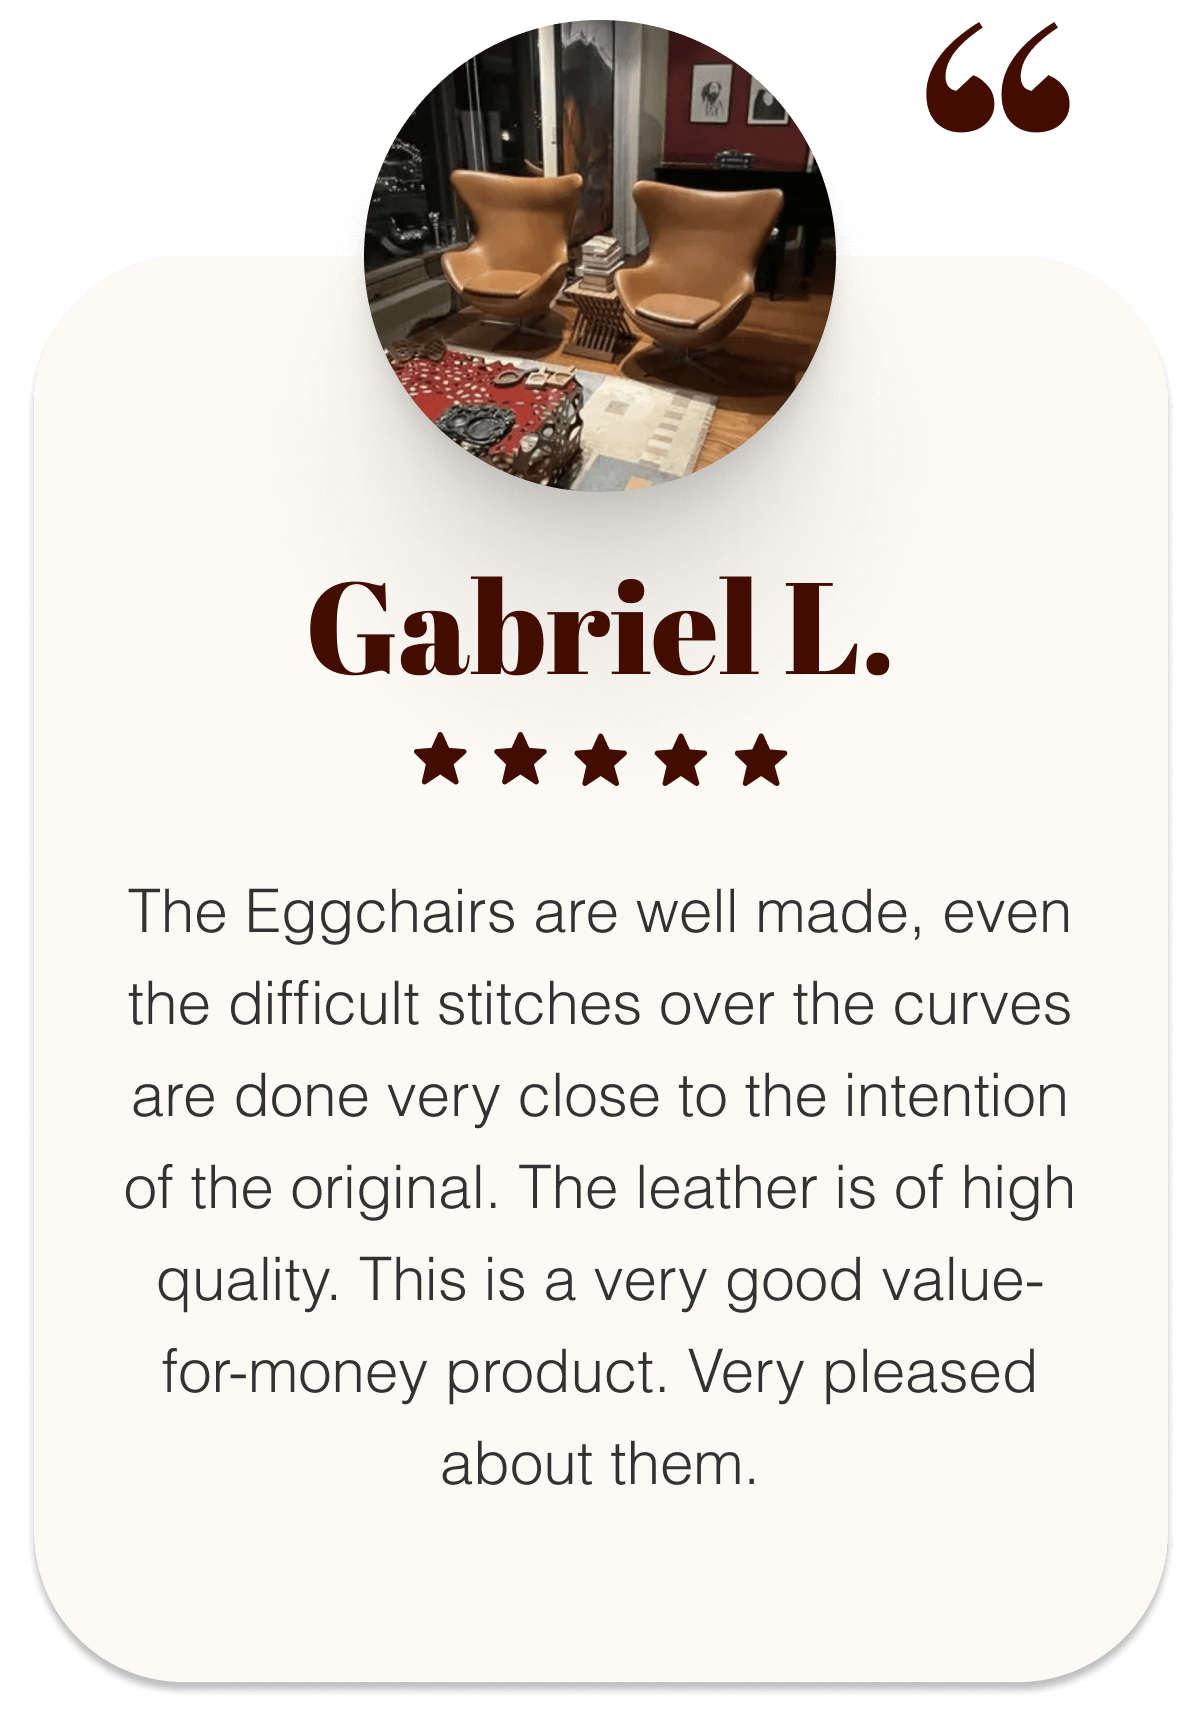 Gabriel L.  ⭐⭐⭐⭐⭐ “The Eggchairs are well made, even the difficult stitches over the curves are done very close to the intention of the original. The leather is of high quality. This is a very good value-for-money product. Very pleased about them.”